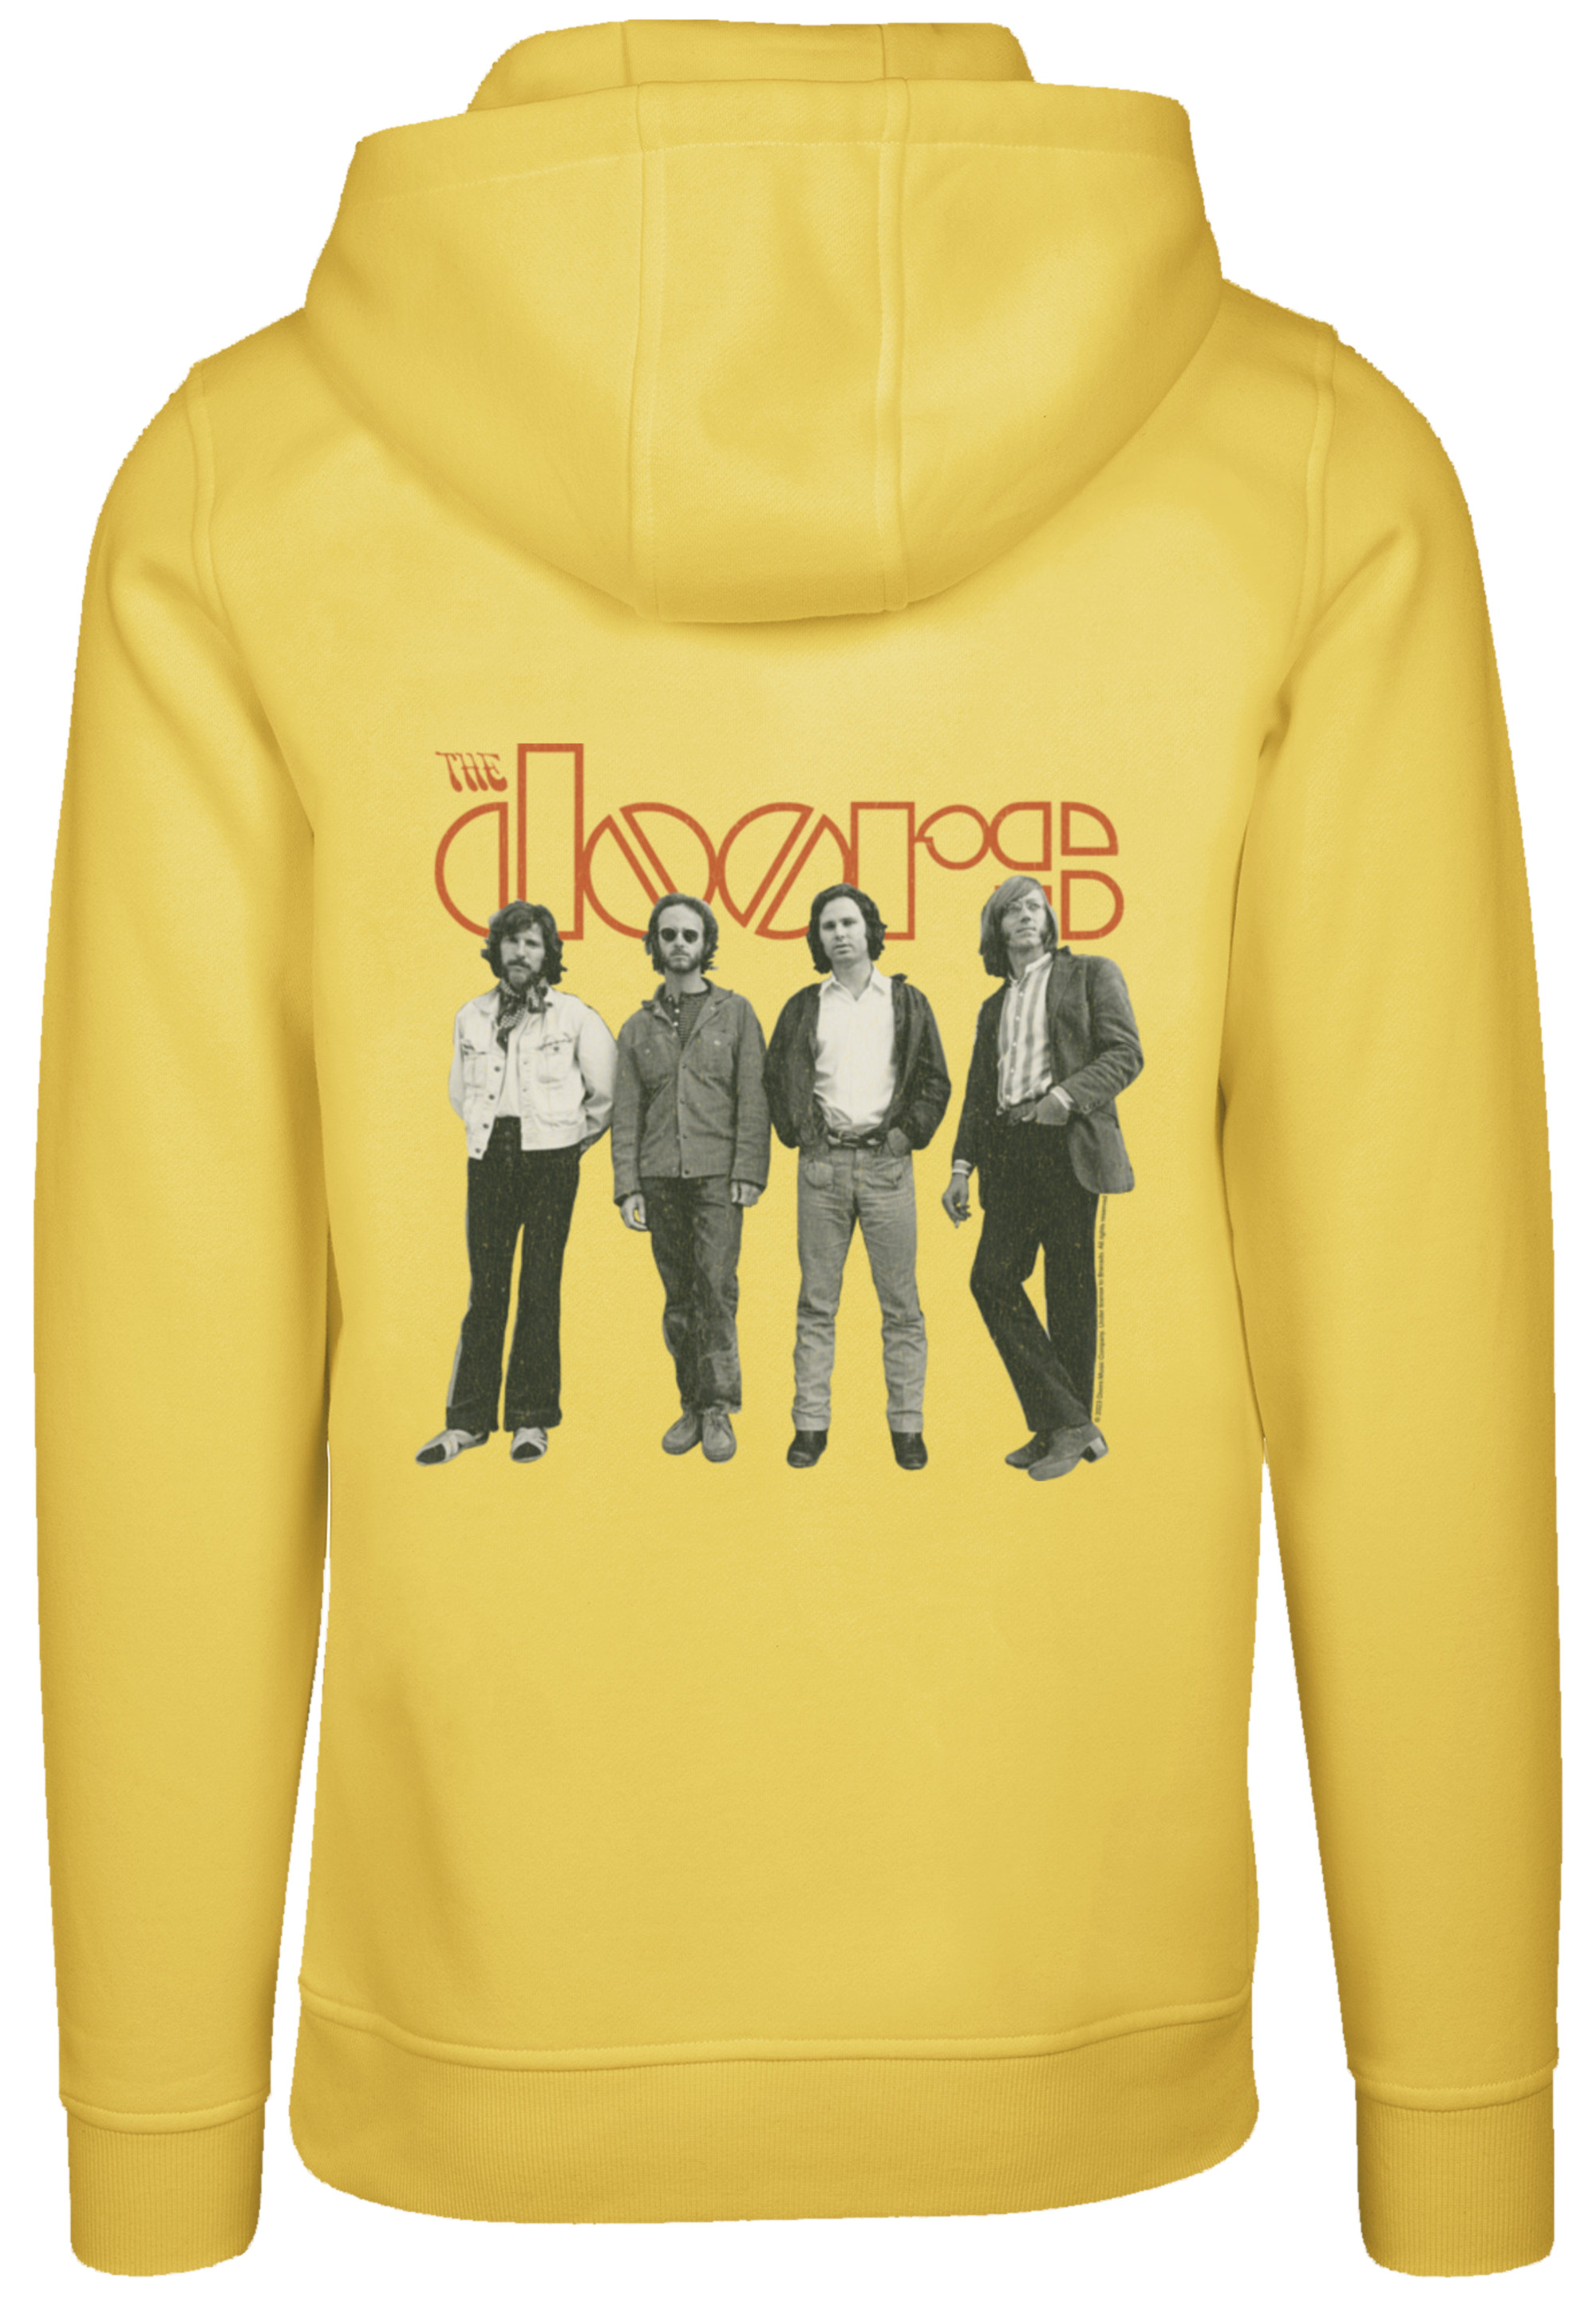 Пуловер F4NT4STIC Hoodie The Doors Music Band Band Standing, цвет taxi yellow